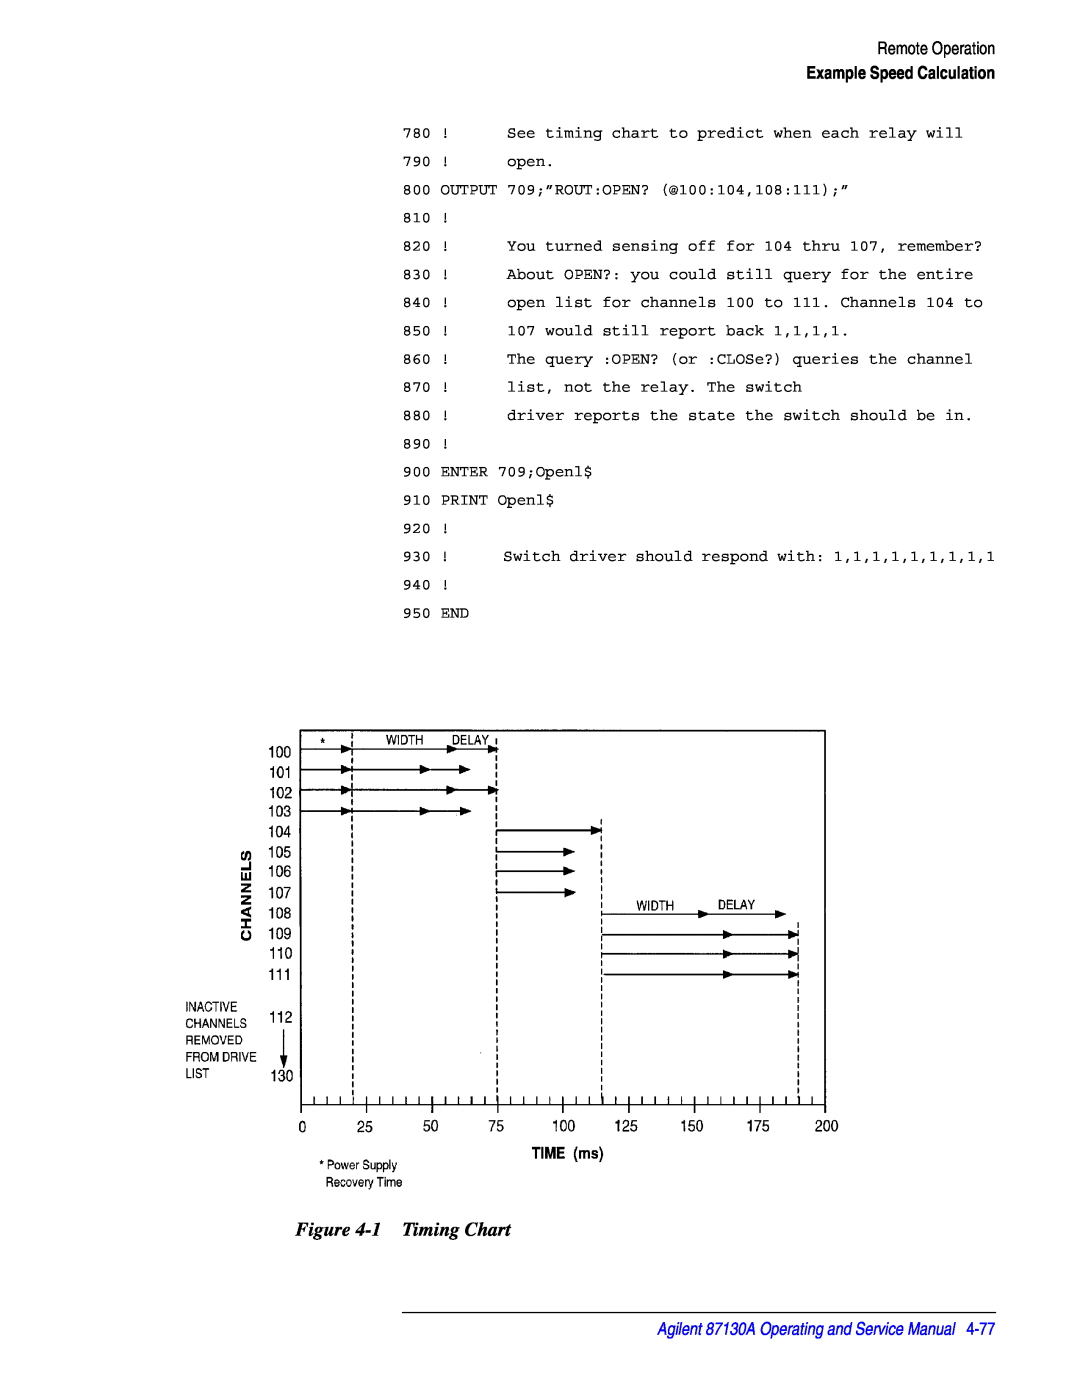 Agilent Technologies 87130A manual 1 Timing Chart, Remote Operation, Example Speed Calculation 